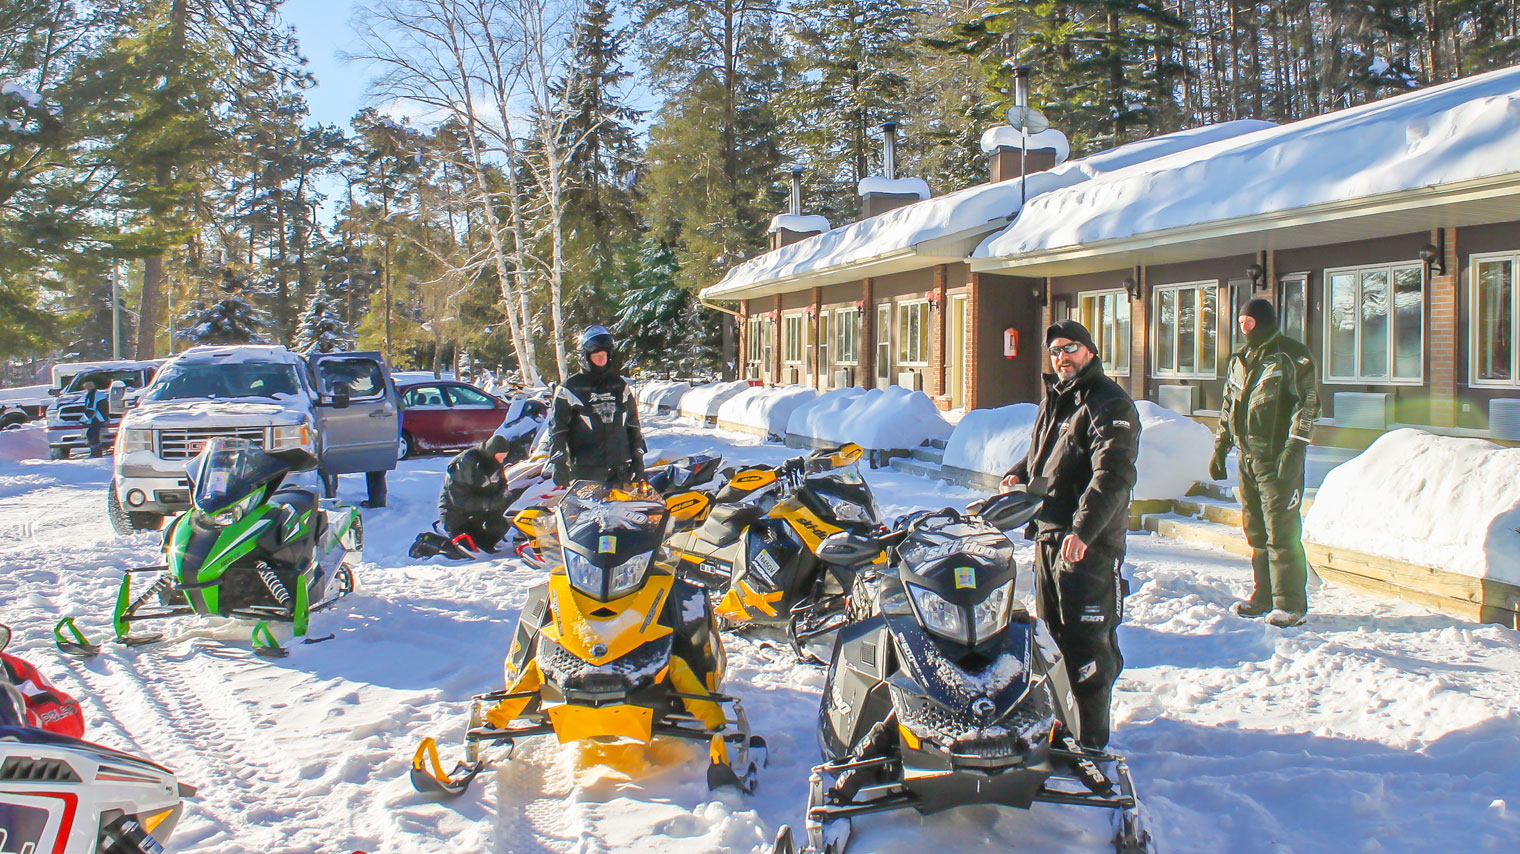 Muskoka Snowmobiling: Route Planning, Accommodations, and Dining